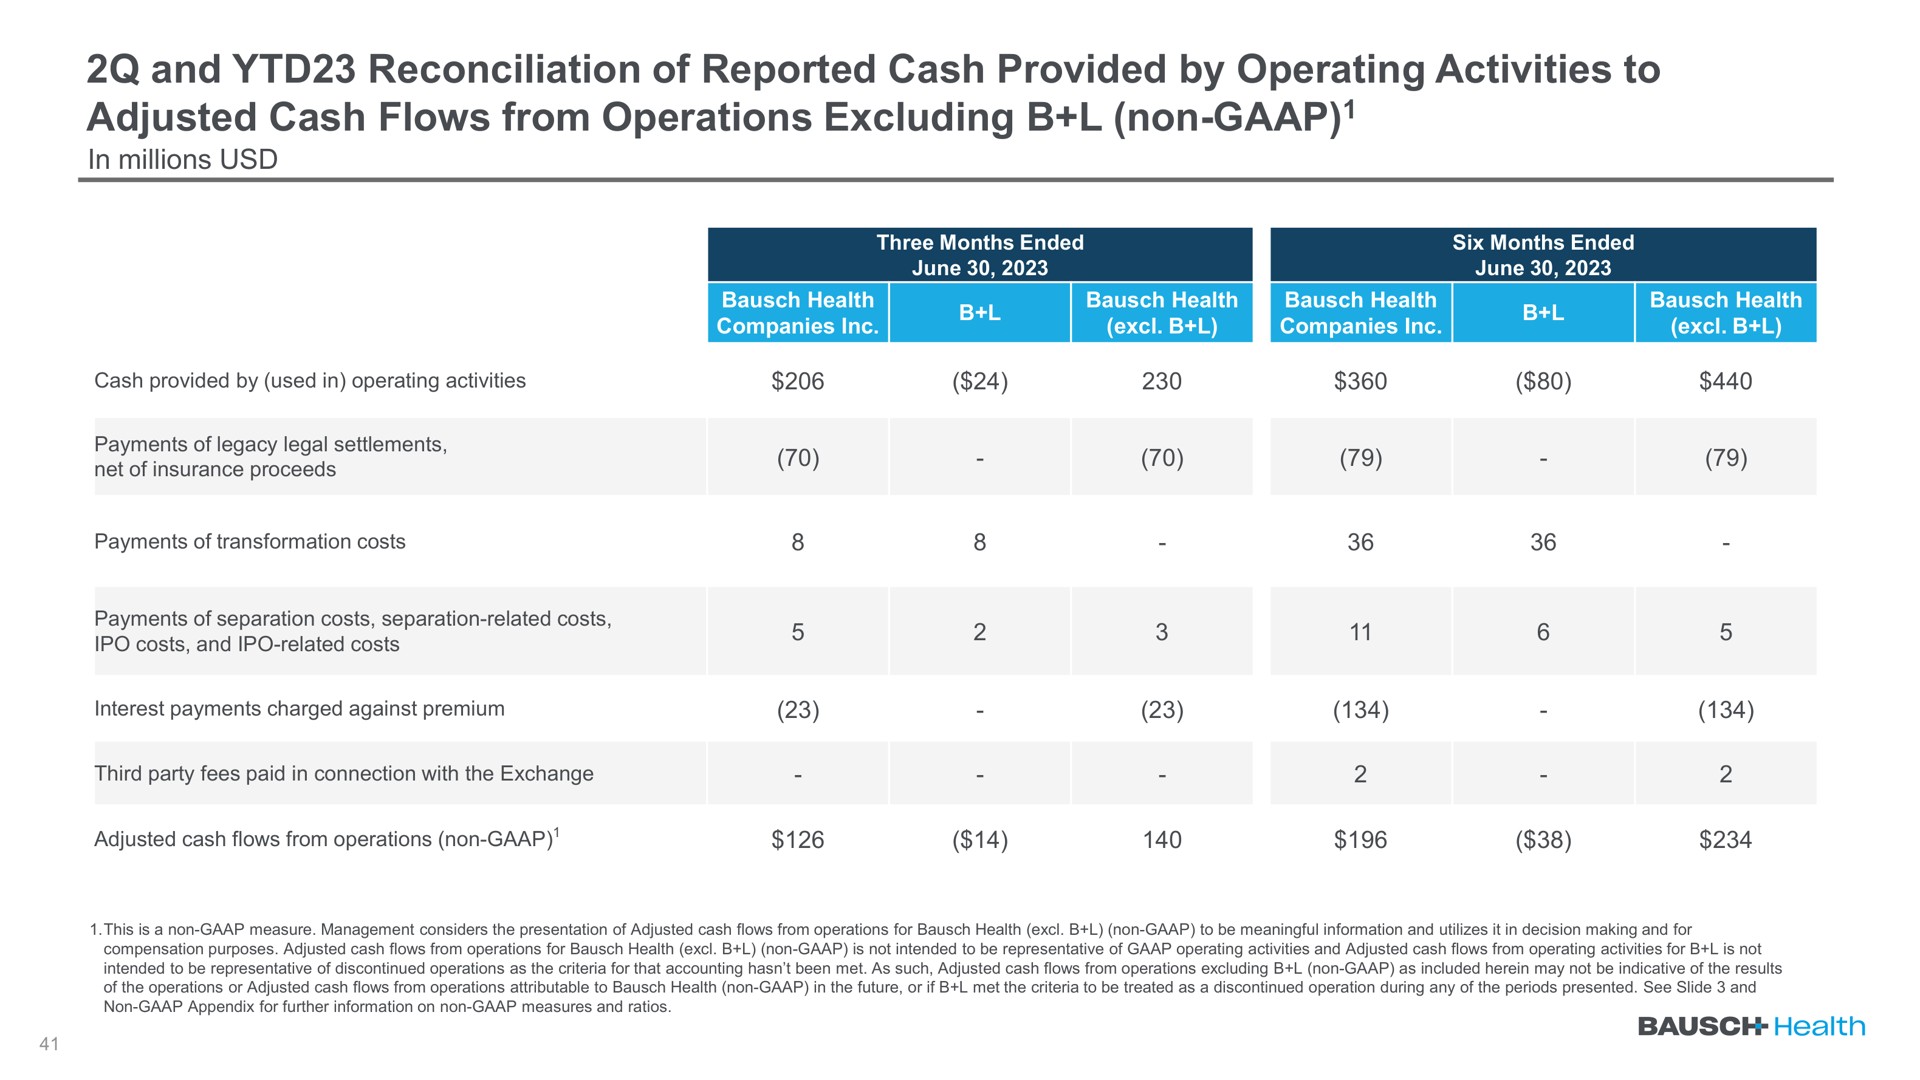 and reconciliation of reported cash provided by operating activities to adjusted cash flows from operations excluding non | Bausch Health Companies